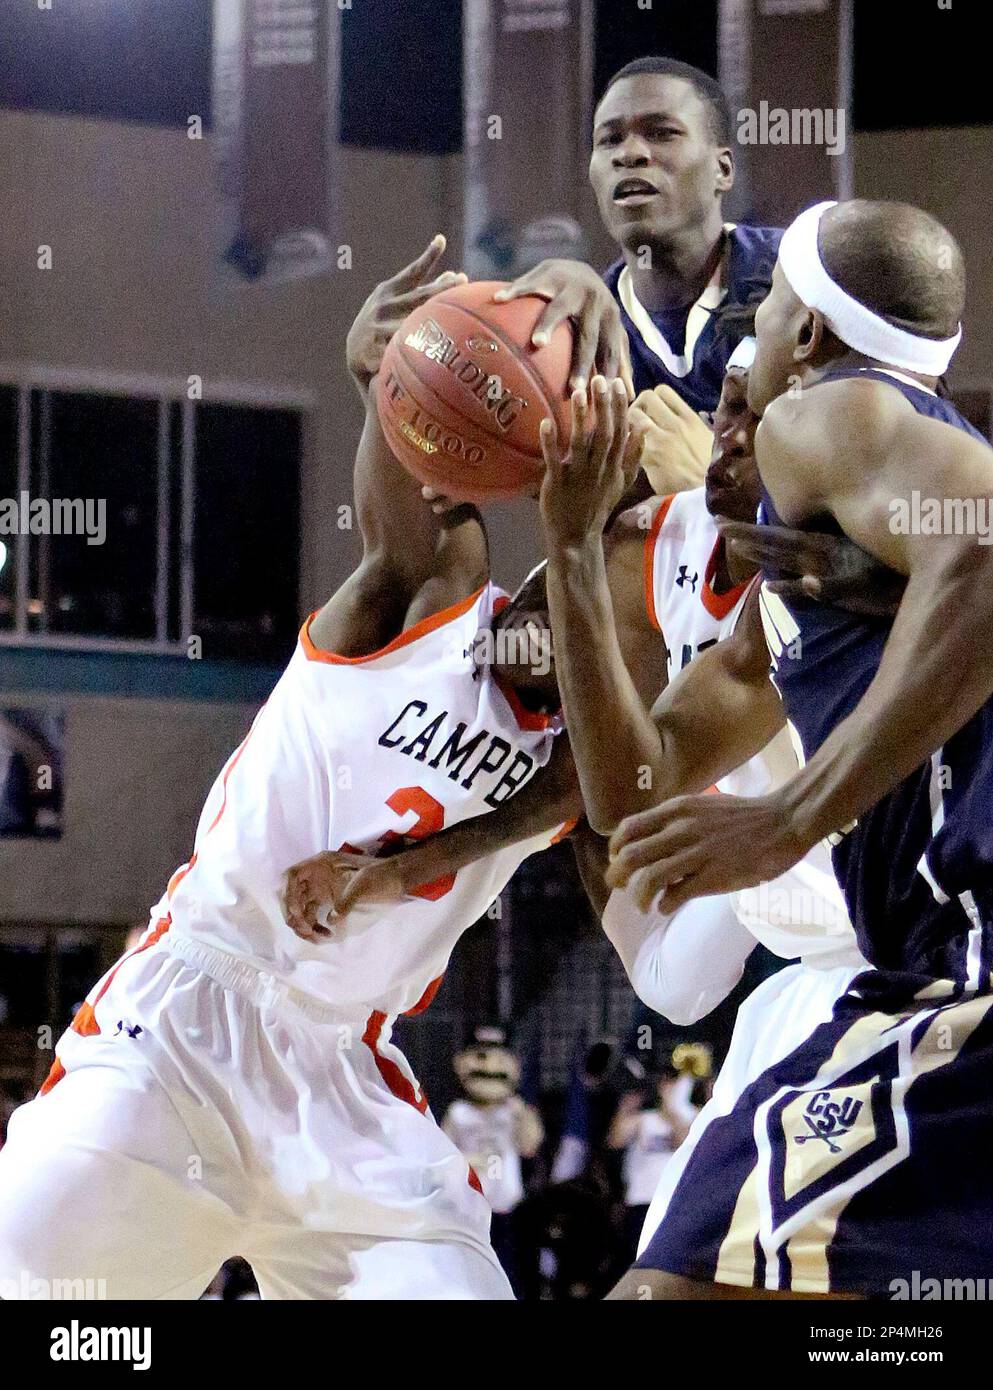 Charleston Southern's Malcolm Bernard (2) snatches the ball from Campbell's  D.J. Mason (35) during an NCAA college basketball game in the Big South  men's tournament, Wednesday, March 5, 2014, in Conway, S.C. (